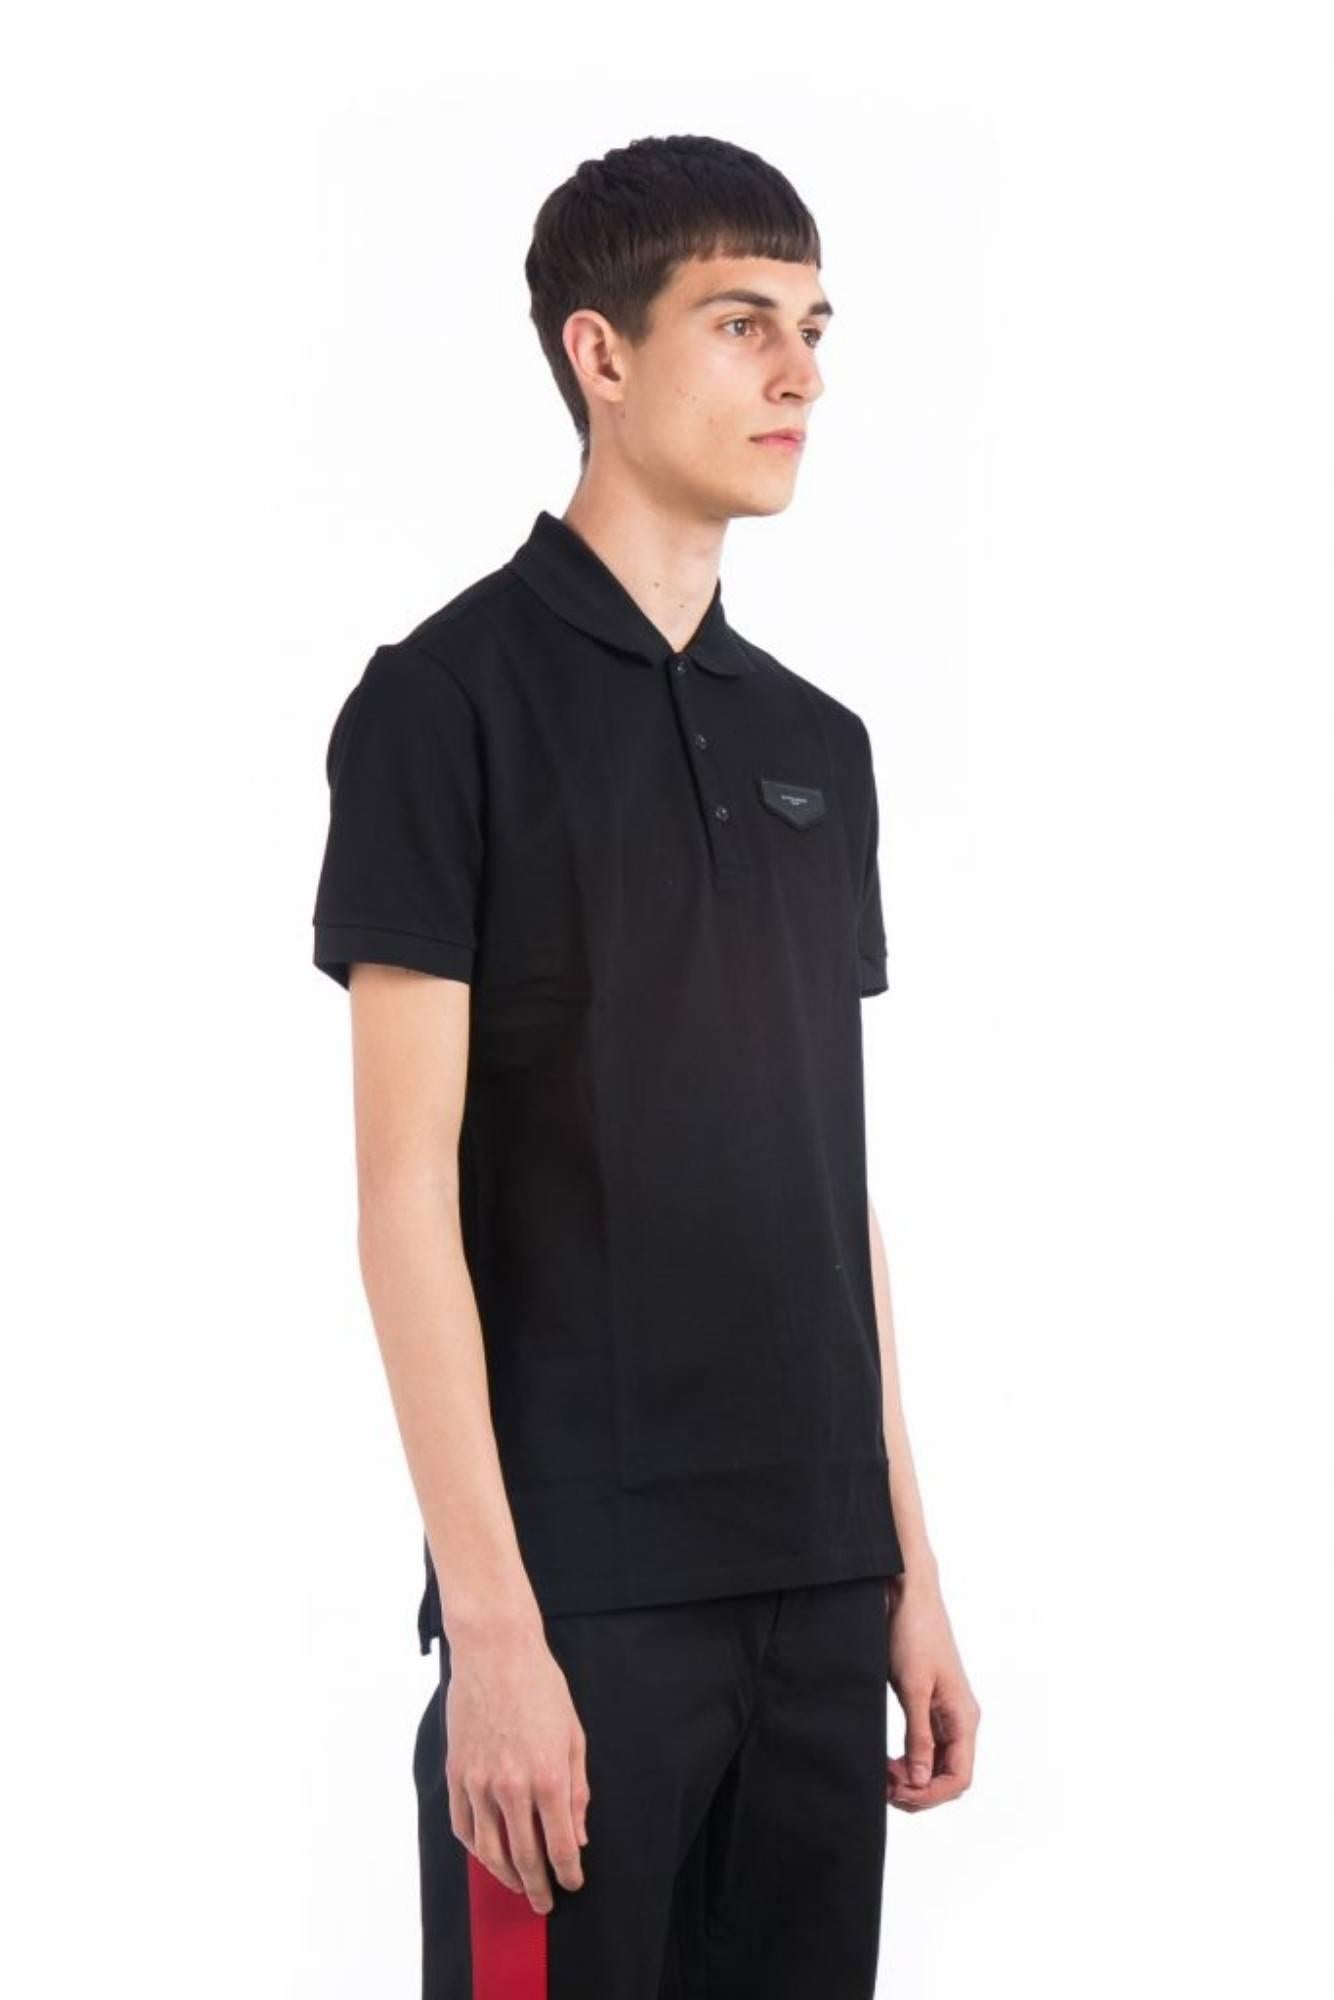 Logo Polo Shirt
Black polo shirt
Classic collar
Front button placket
Short sleeves
Straight hem
Givenchy logo plaque at the chest
Composition 100% cotton